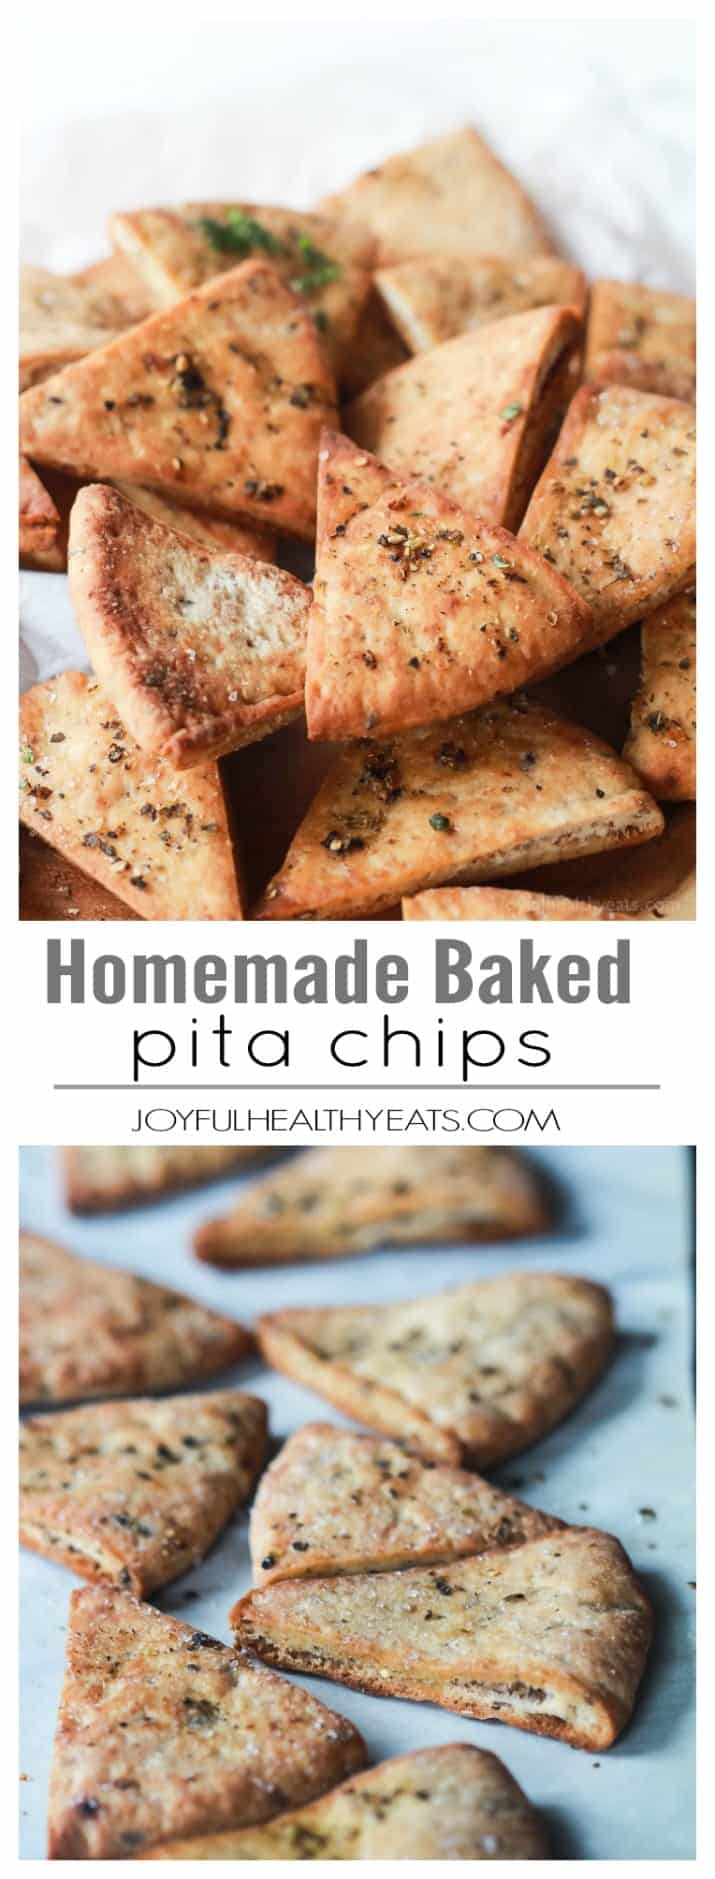 Homemade Baked Pita Chips | How to Make the Best Pita Chips!